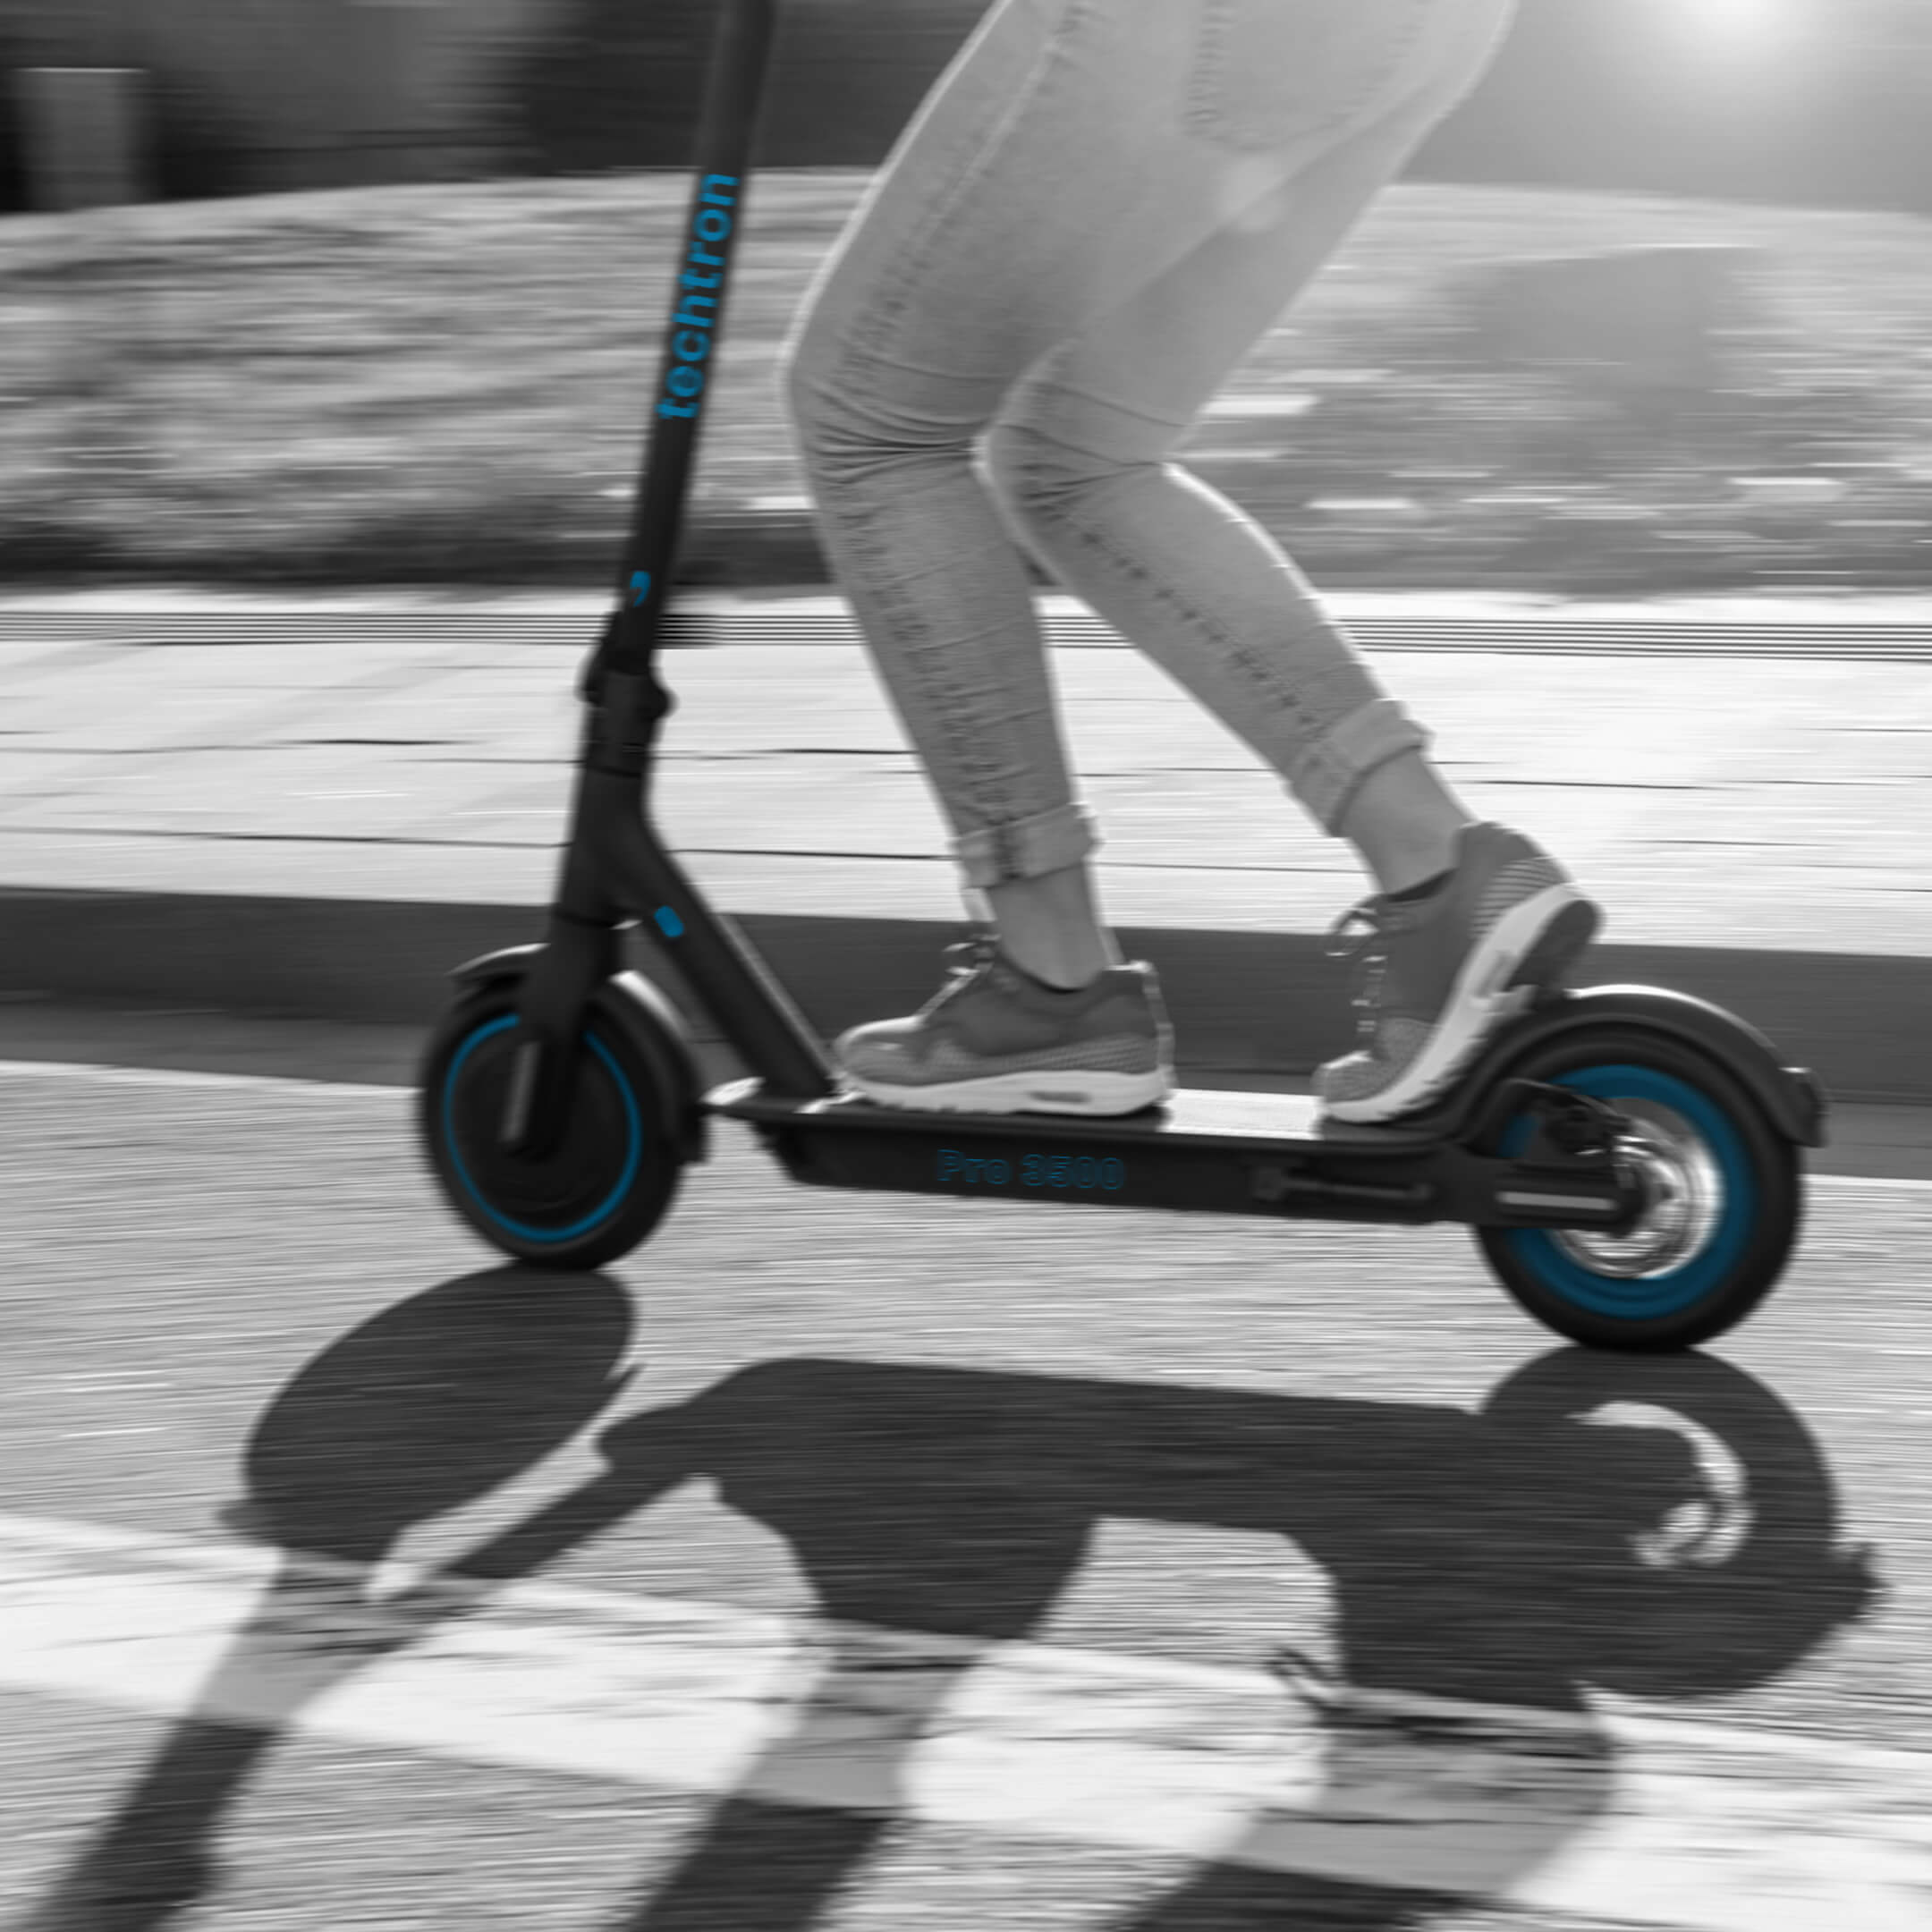 techtron® Pro 3500 Electric Scooter